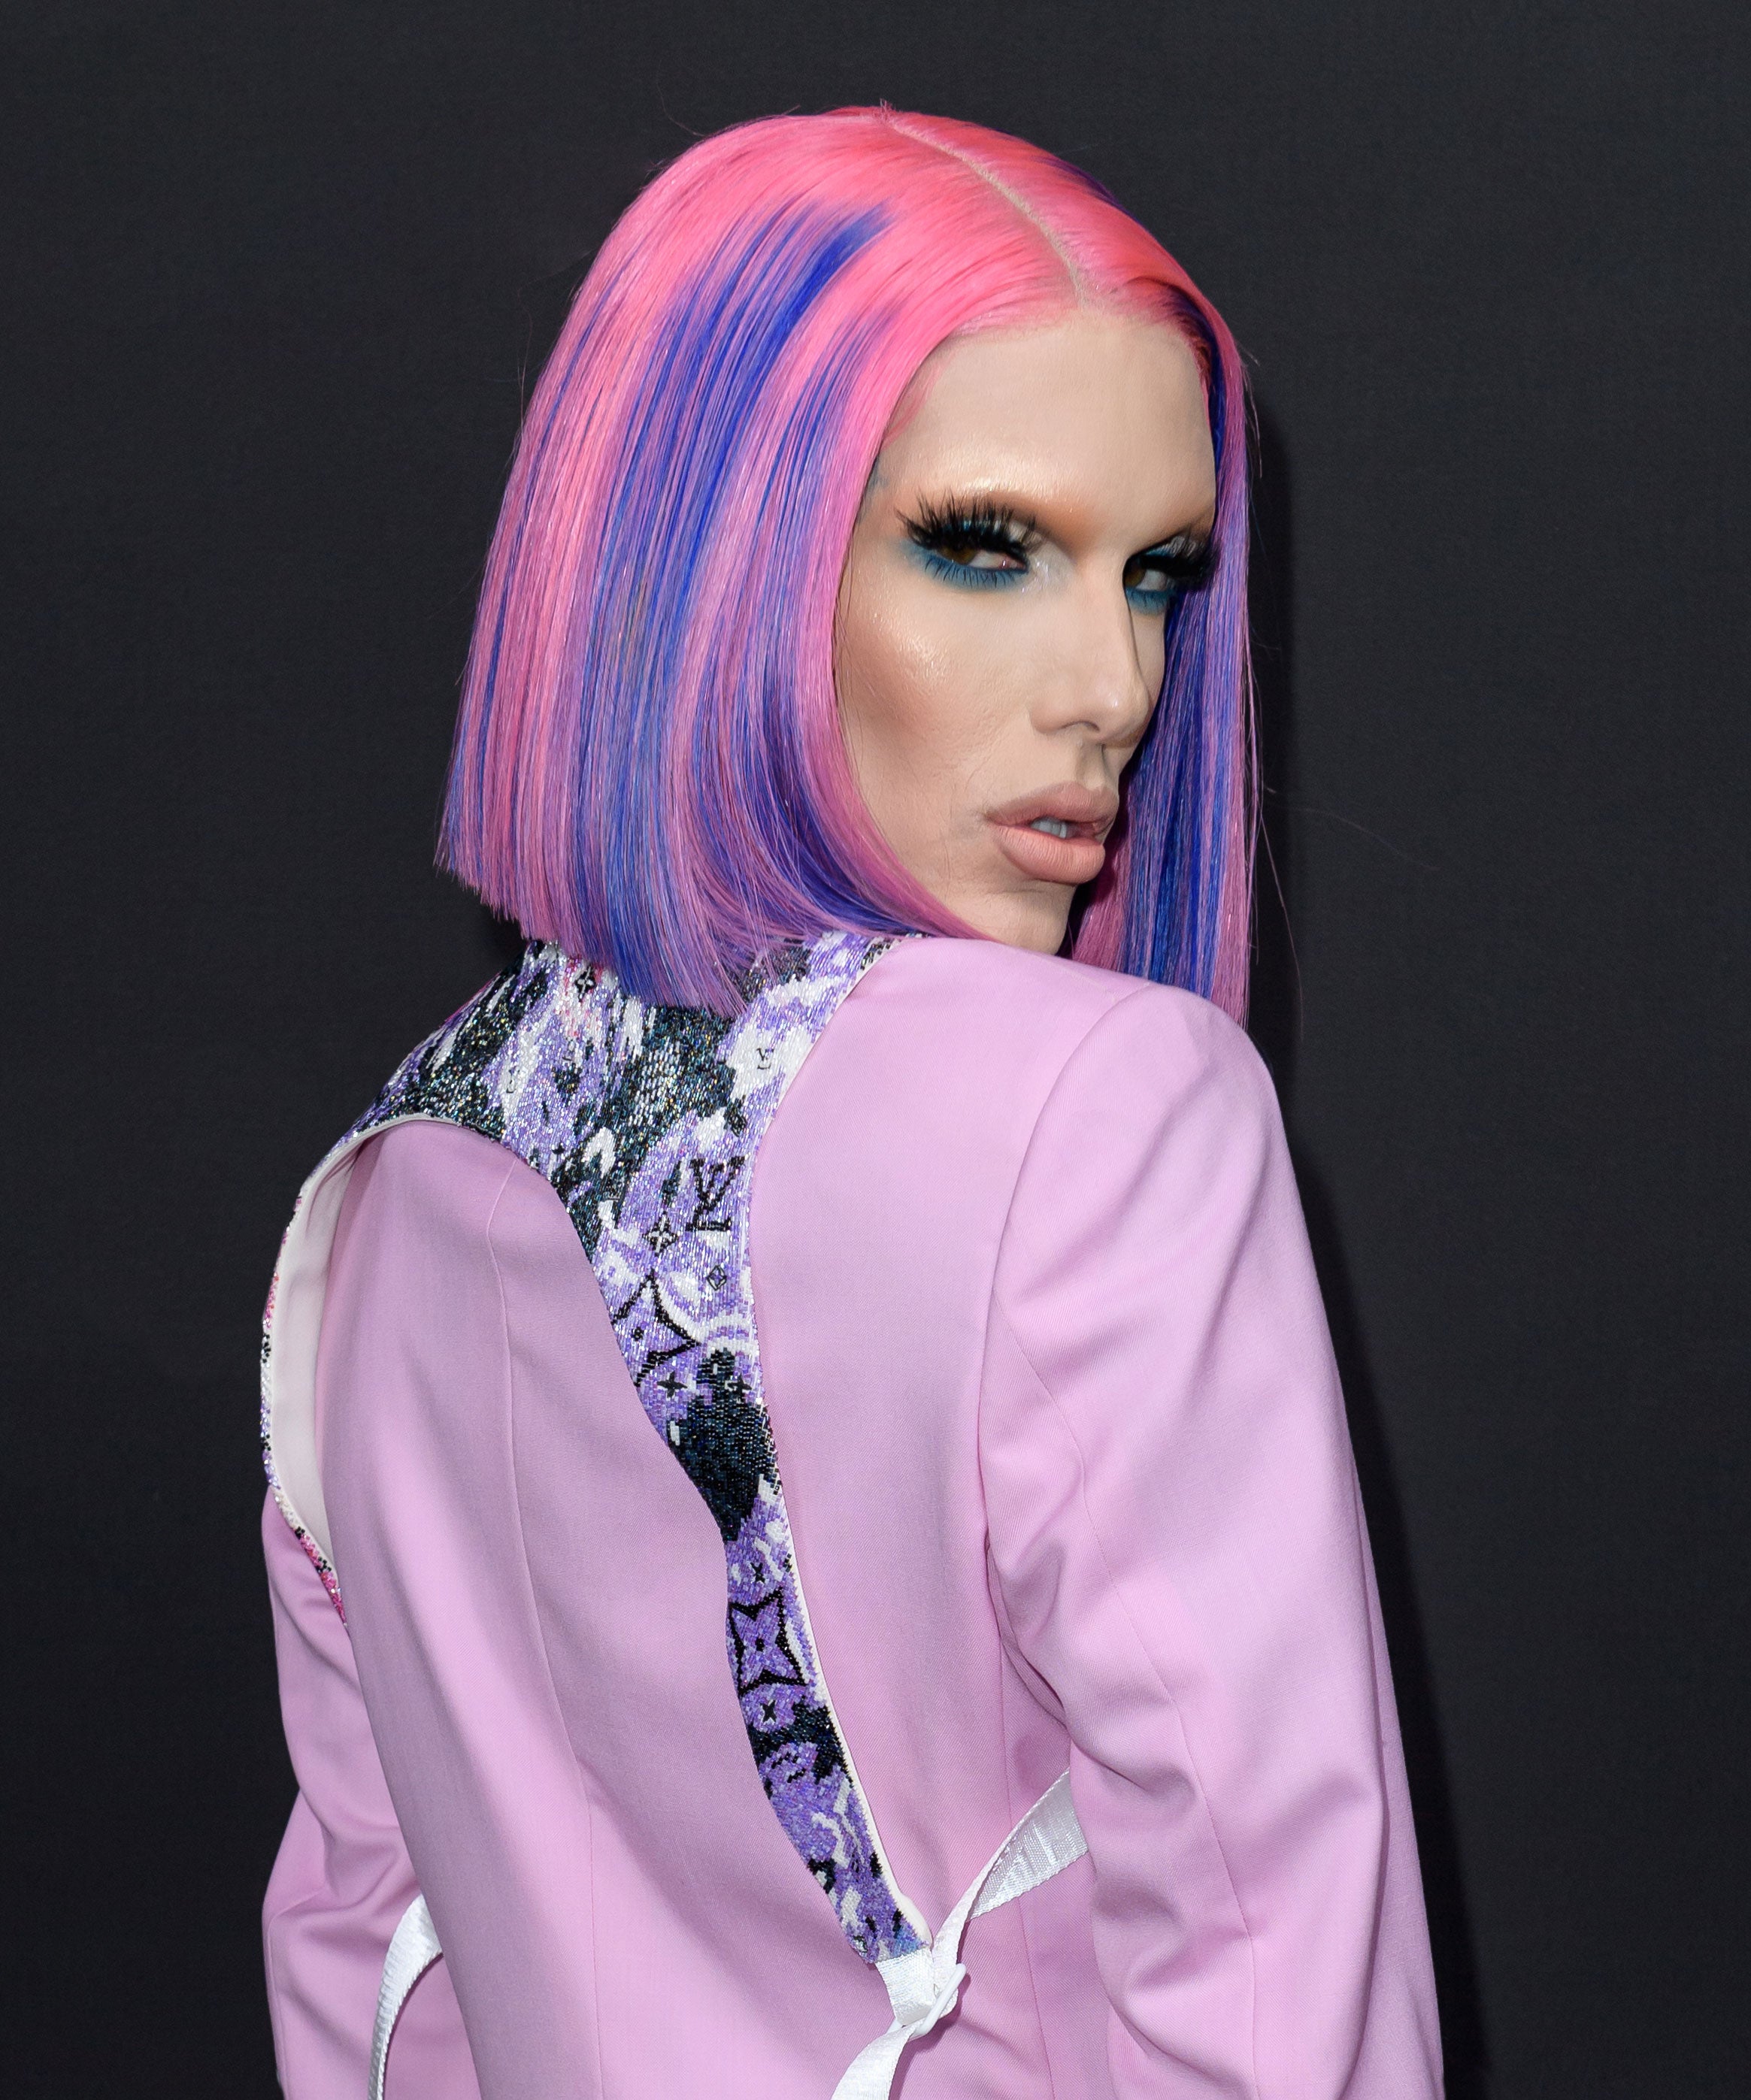 Jeffree Star Speaks Out After Criticism for New Cremated Makeup Line